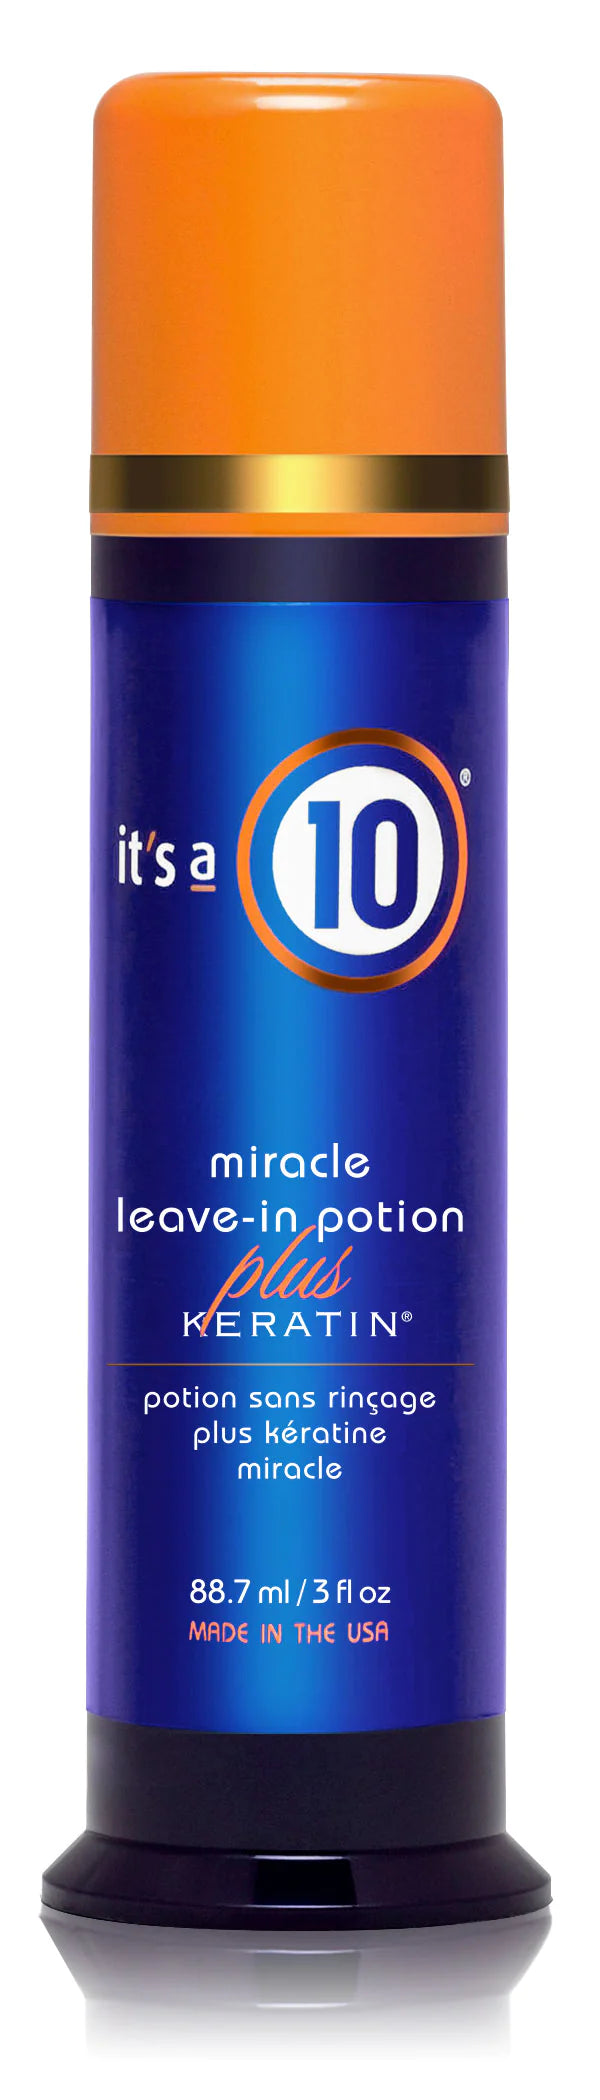 It's a 10 Miracle Leave-In Potion Plus Keratin 3 oz bottle image